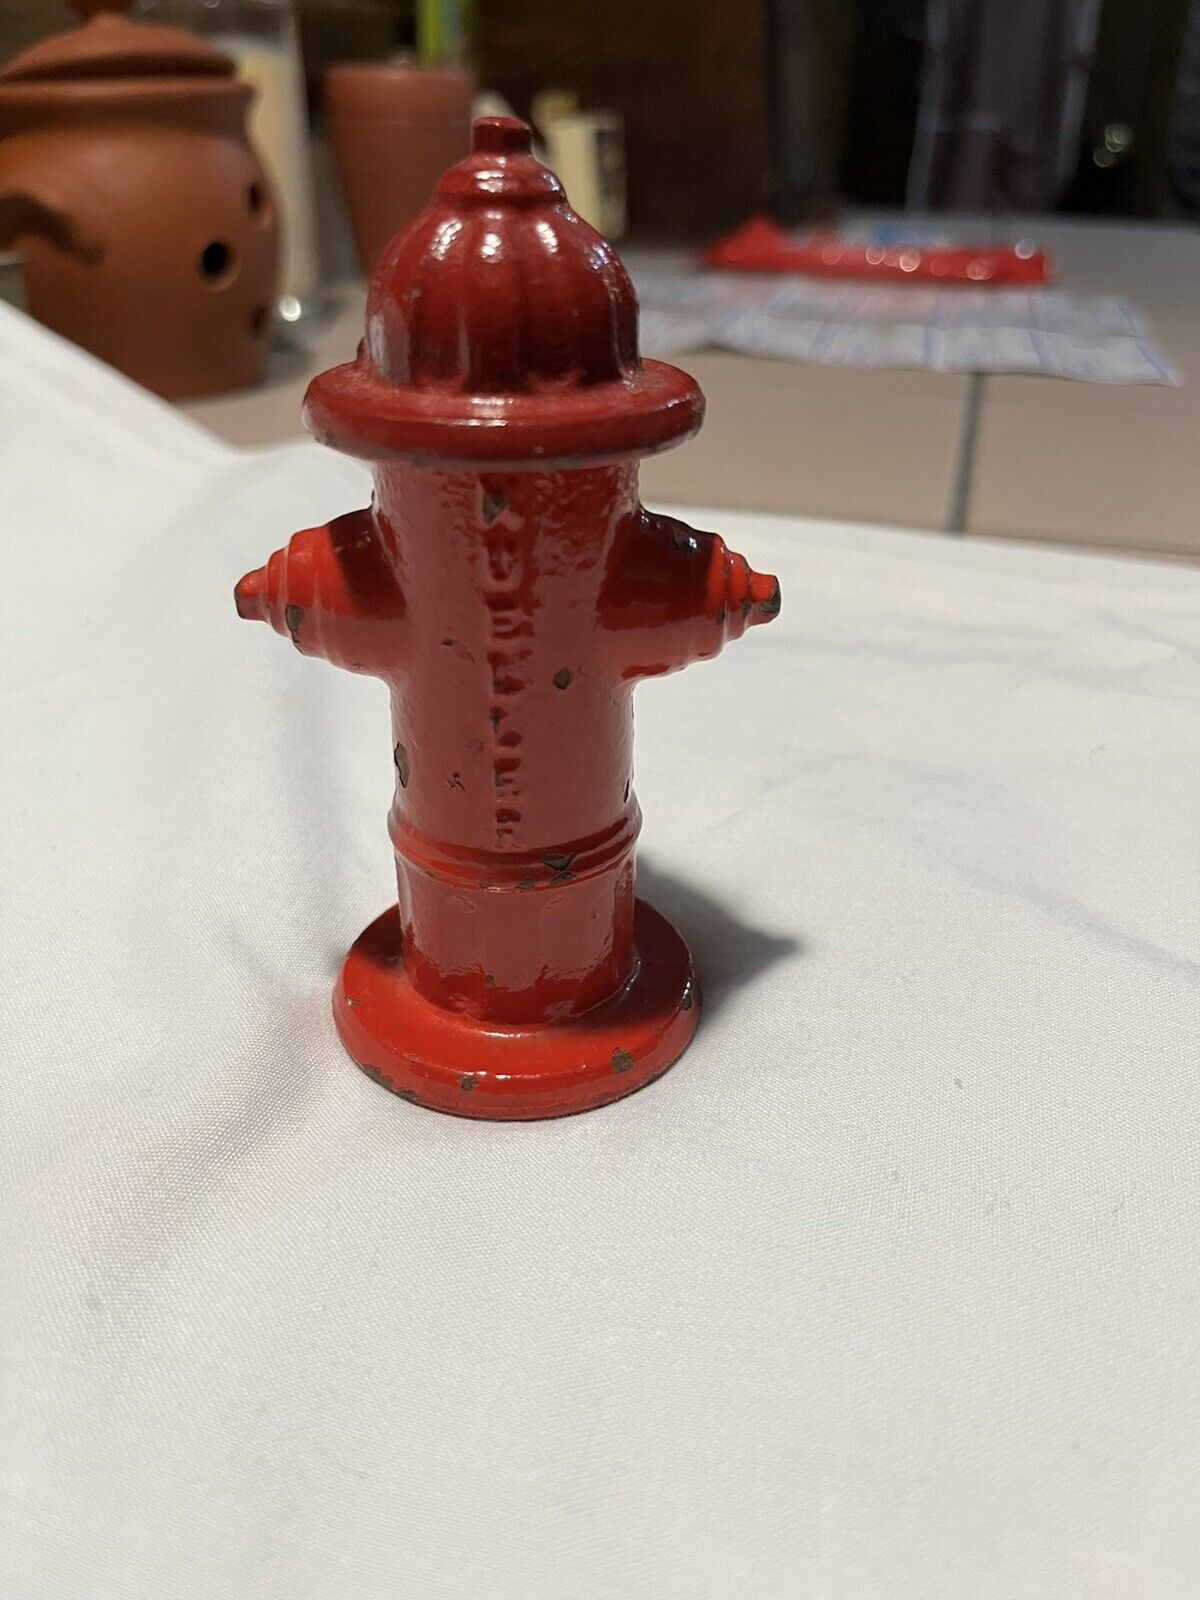 Vintage MUELLER MINIATURE FIRE HYDRANT  ADVERTISING PAPERWEIGHT CAST IRON